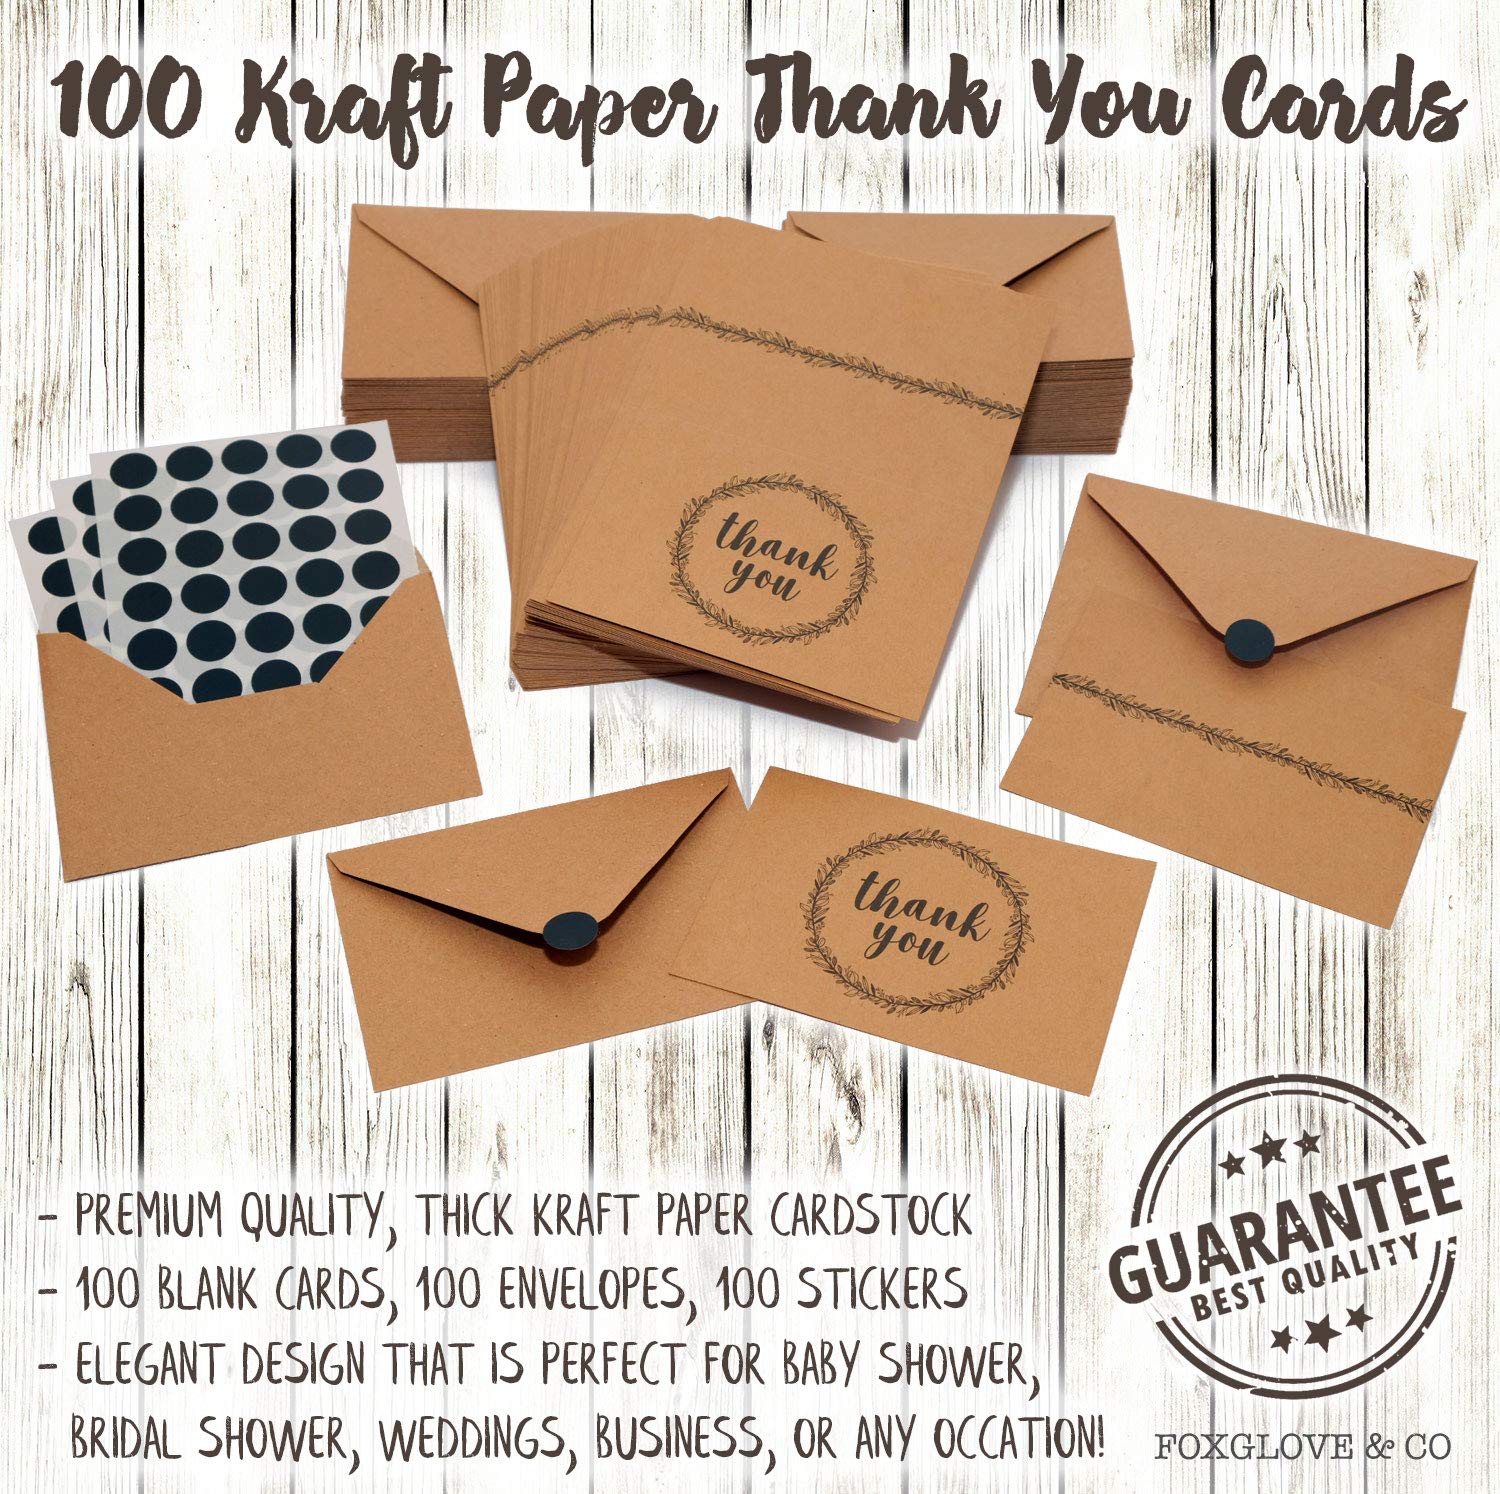 Thank You Cards Bulk Set of 100 - Includes Thank You Notes, Blank Cards with Envelopes & Stickers - Perfect for Business, Wedding, Graduation, Bridal & Baby Shower, Funeral - Floral Kraft Paper Design